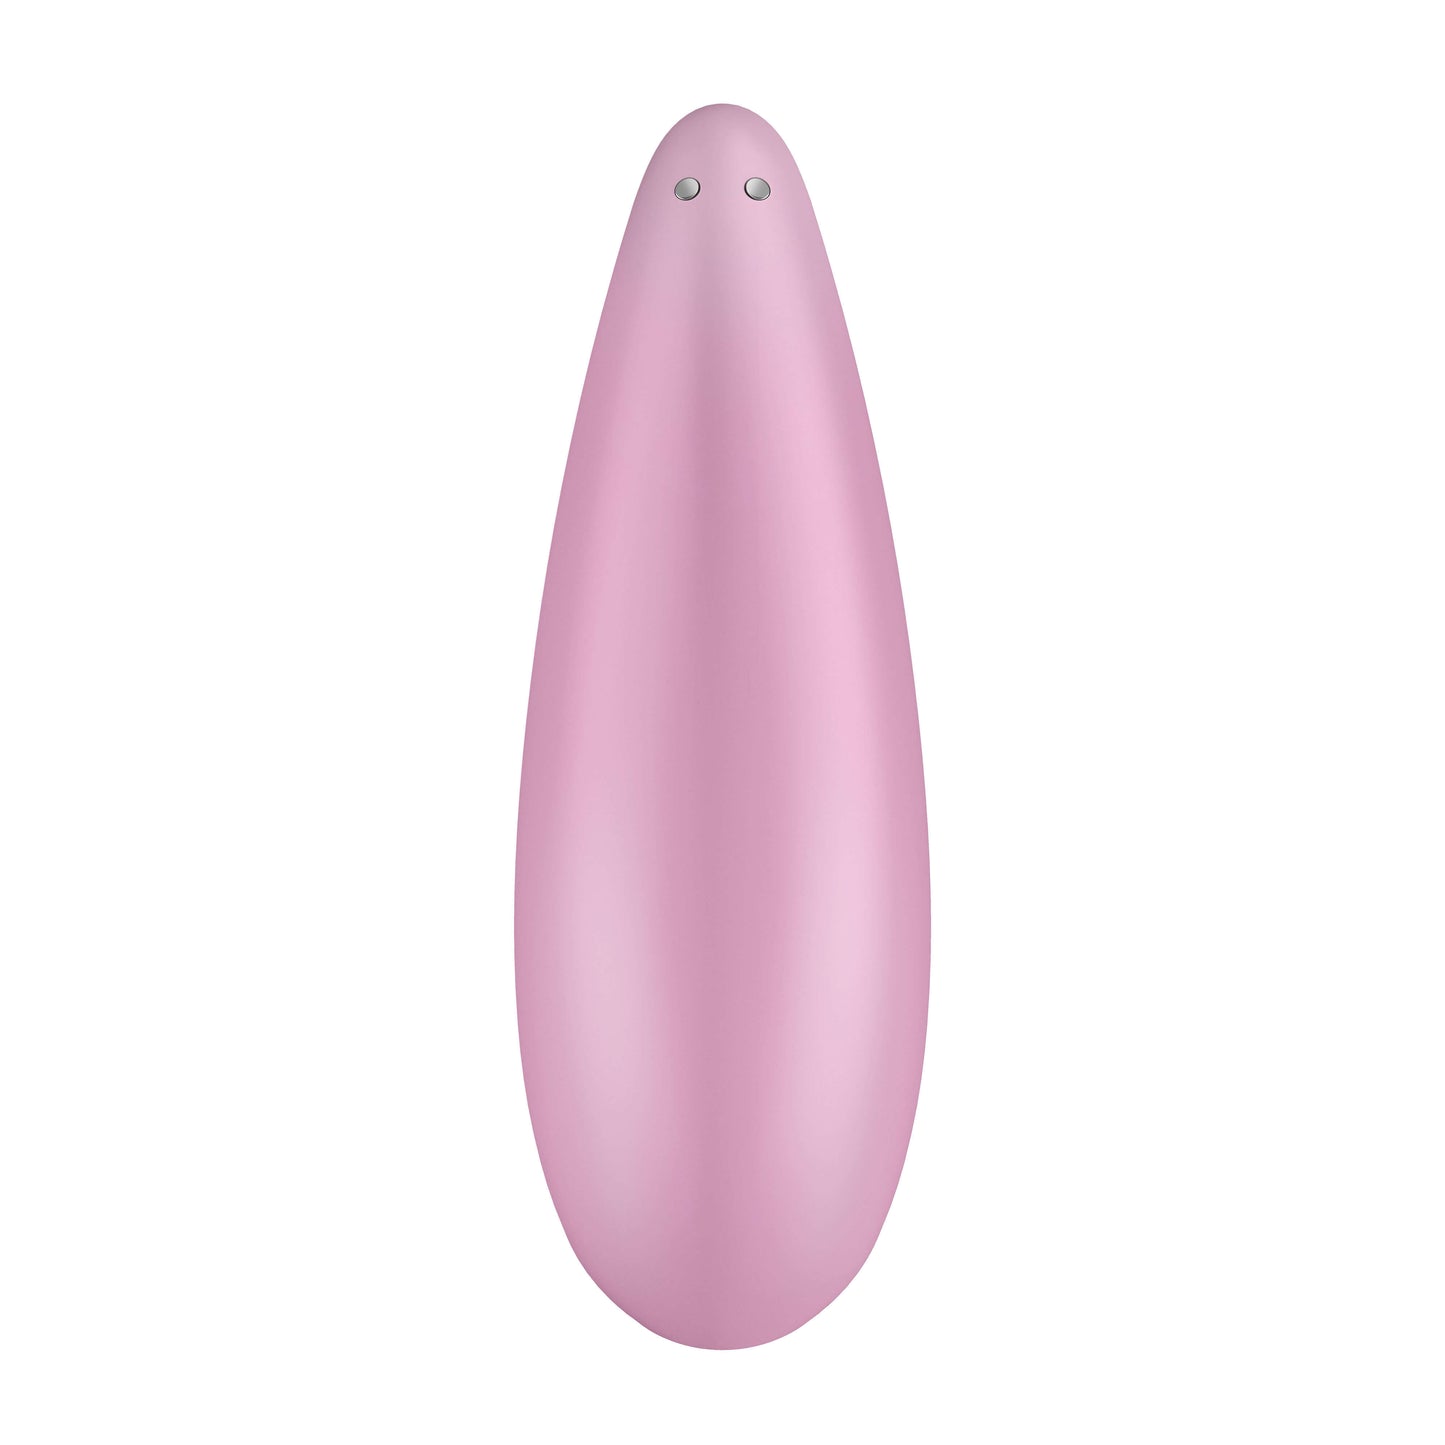 Satisfyer Curvy 3+ Air Pulse Vibrator - The Bigger O an online sex toy shop USA, Canada & UK shipping available